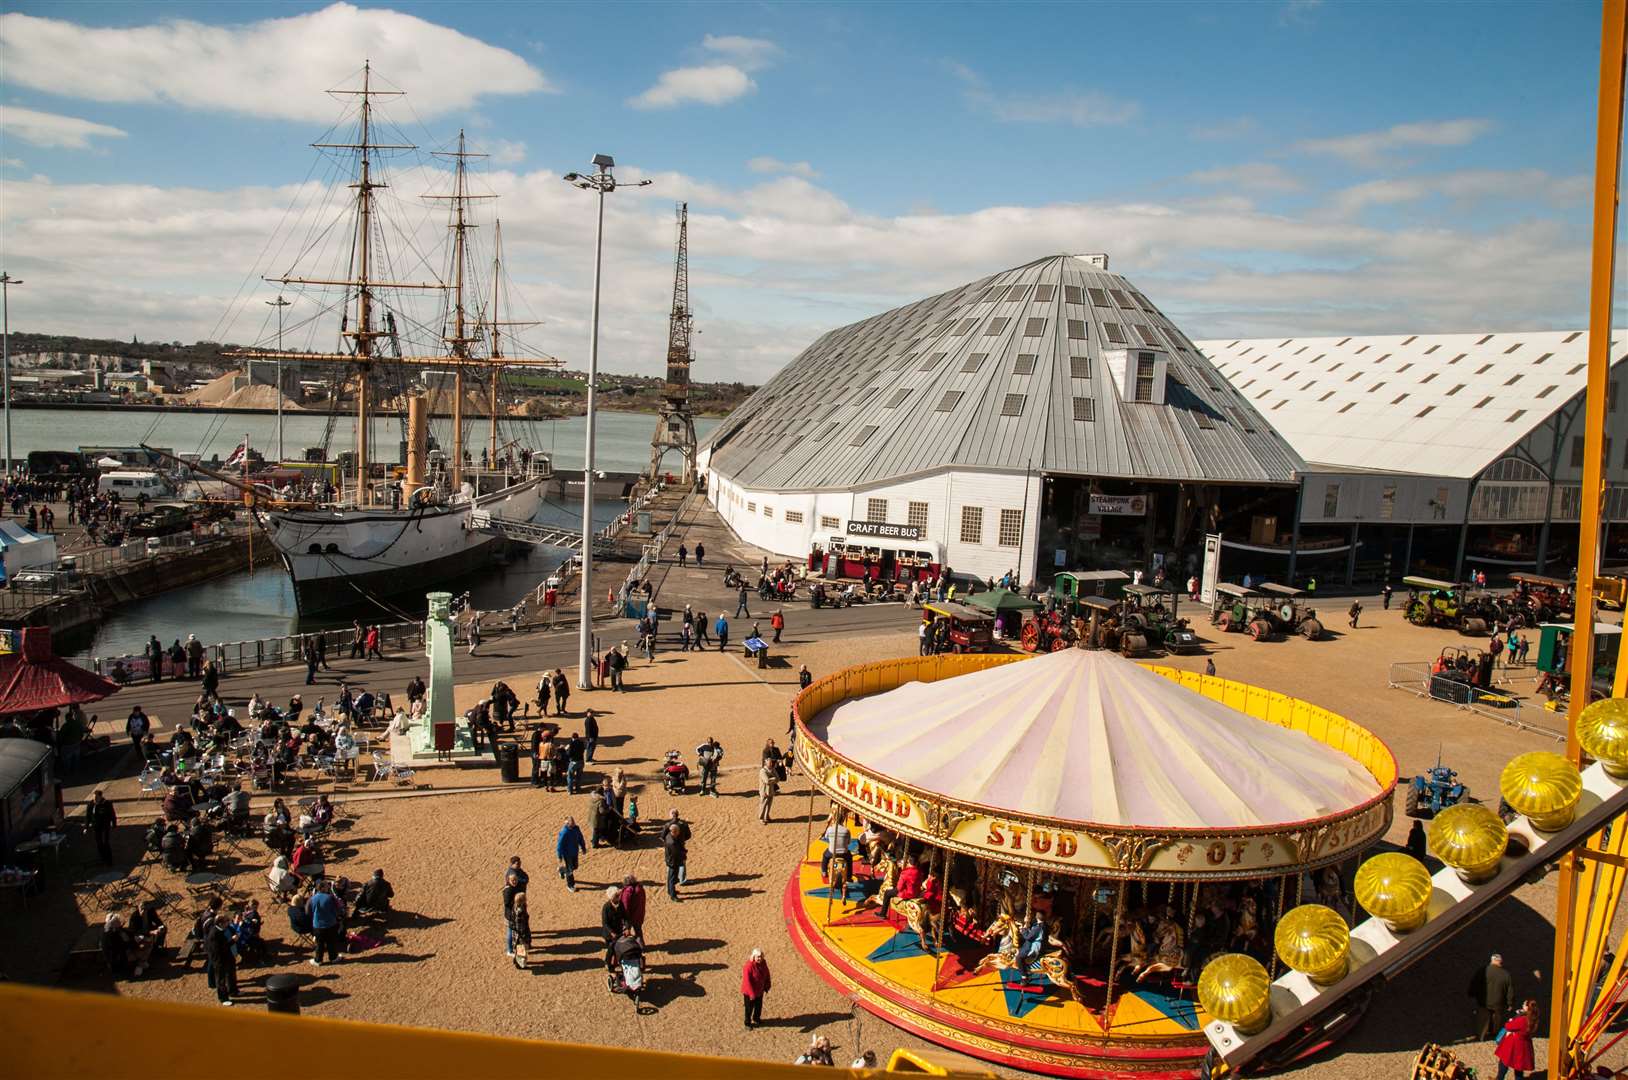 Chatham Historic Dockyard is now a popular tourist attraction hosting dozens of events every year